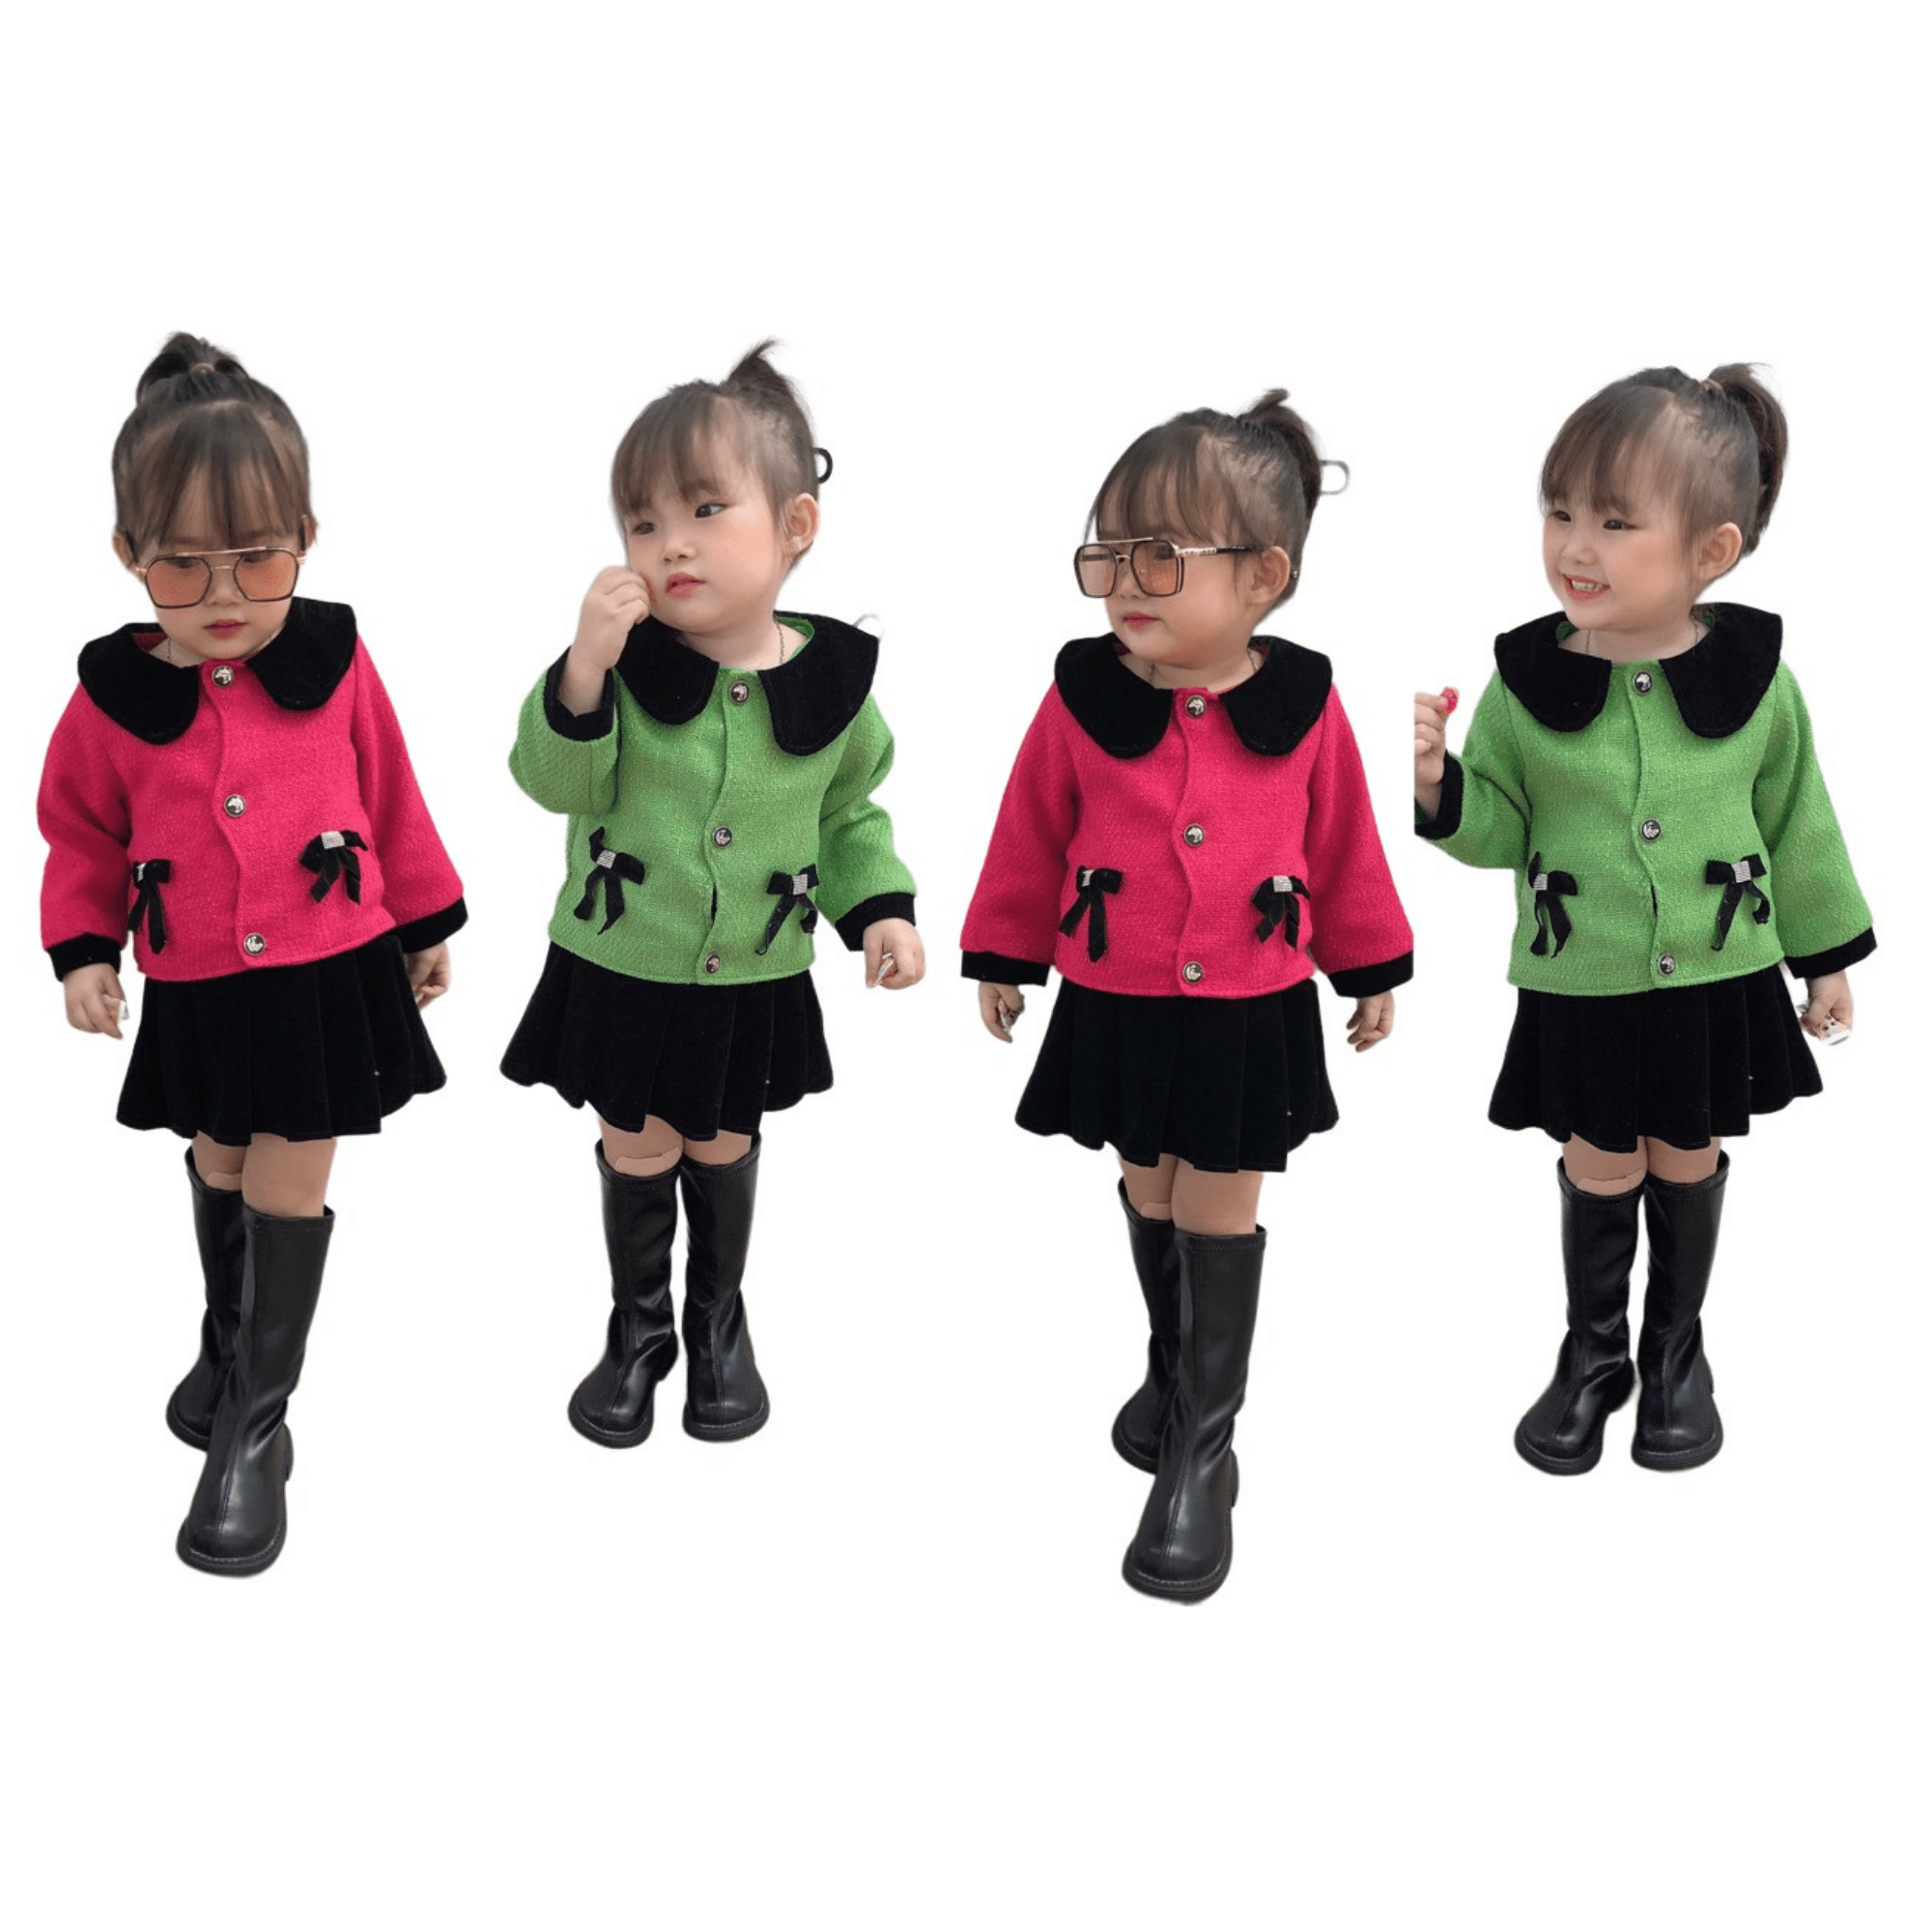 Winter Clothes For Kids High Quality 100% Wool Dresses New Fashion Each One In Opp Bag From Vietnam Manufacturer 3